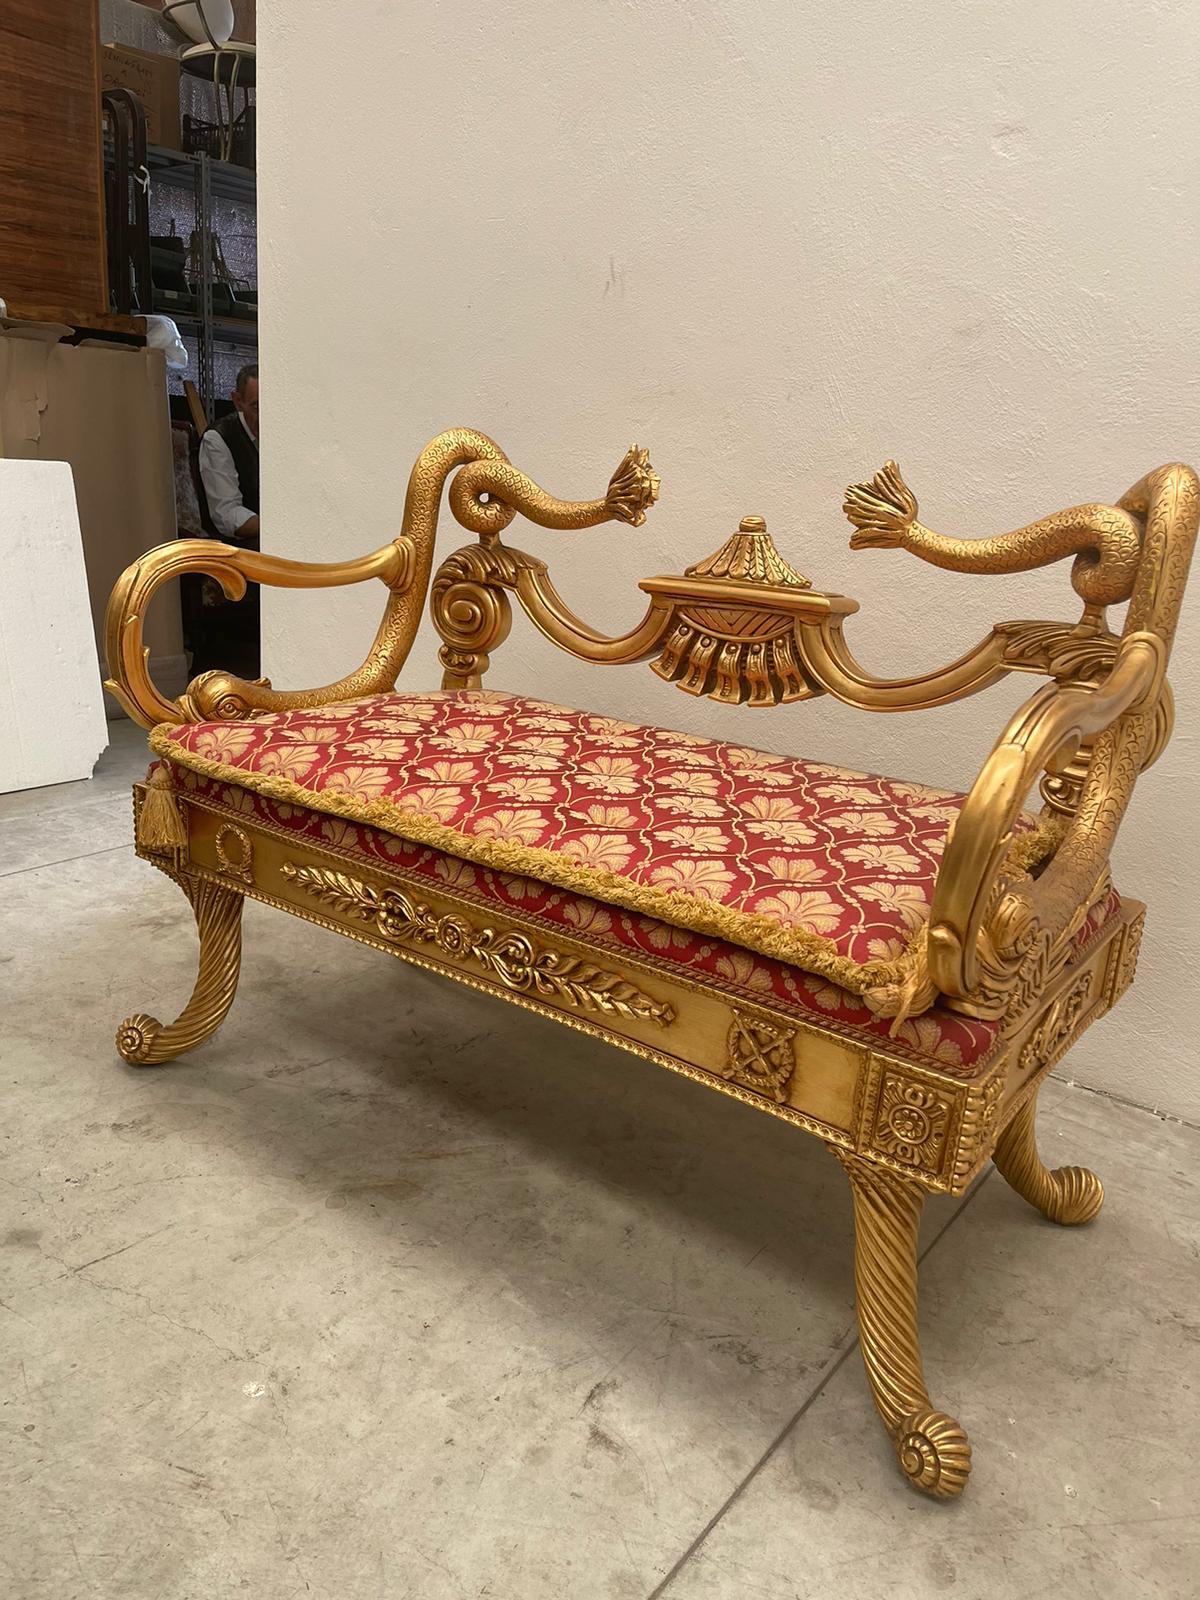 Sofa made in Italy with the finest prices, brass and velvet. it was created taking inspiration from Admiral Nelson's one-of-a-kind pieces.

Created and made by Mice di Domenico Rugiano.